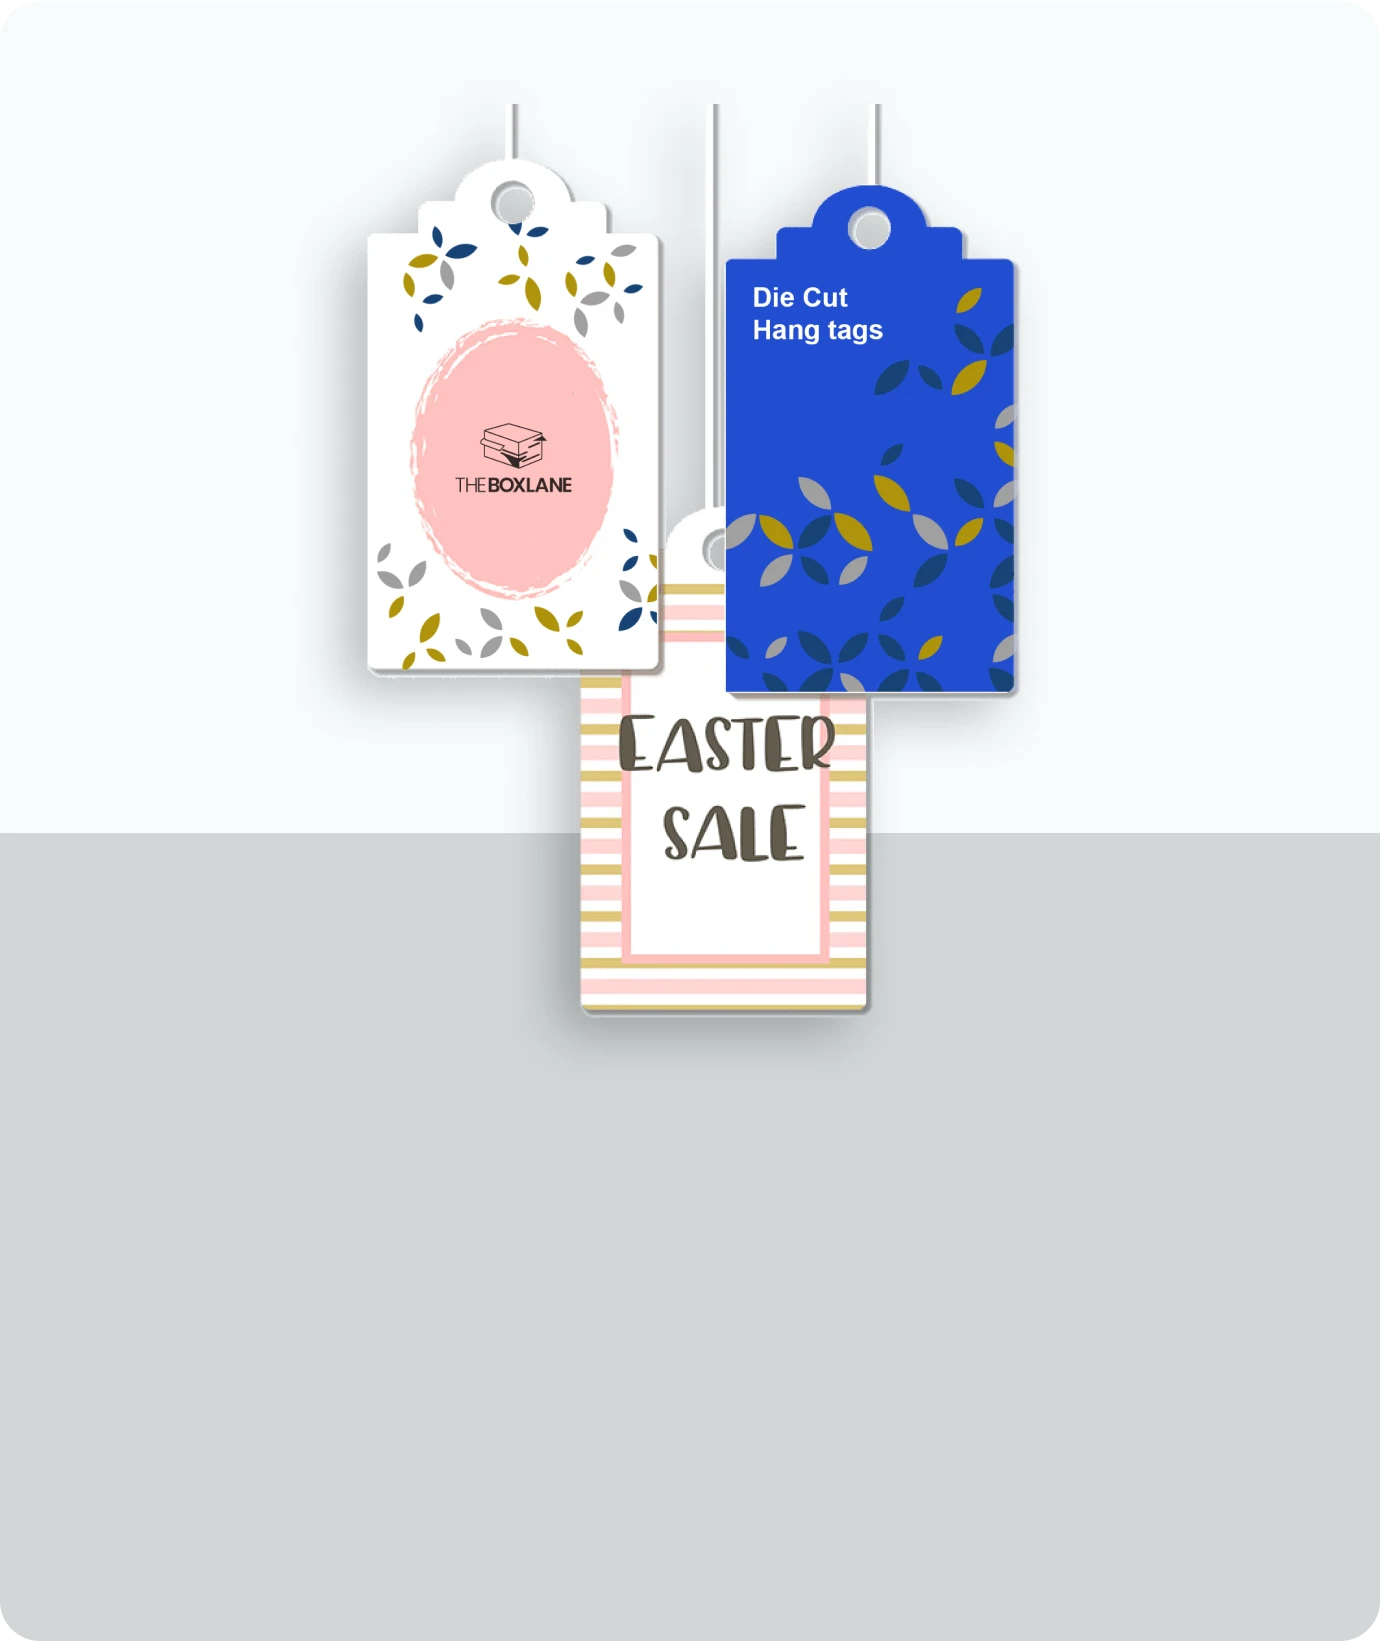 Die Cut Hang Tags related product image | The Box Lane